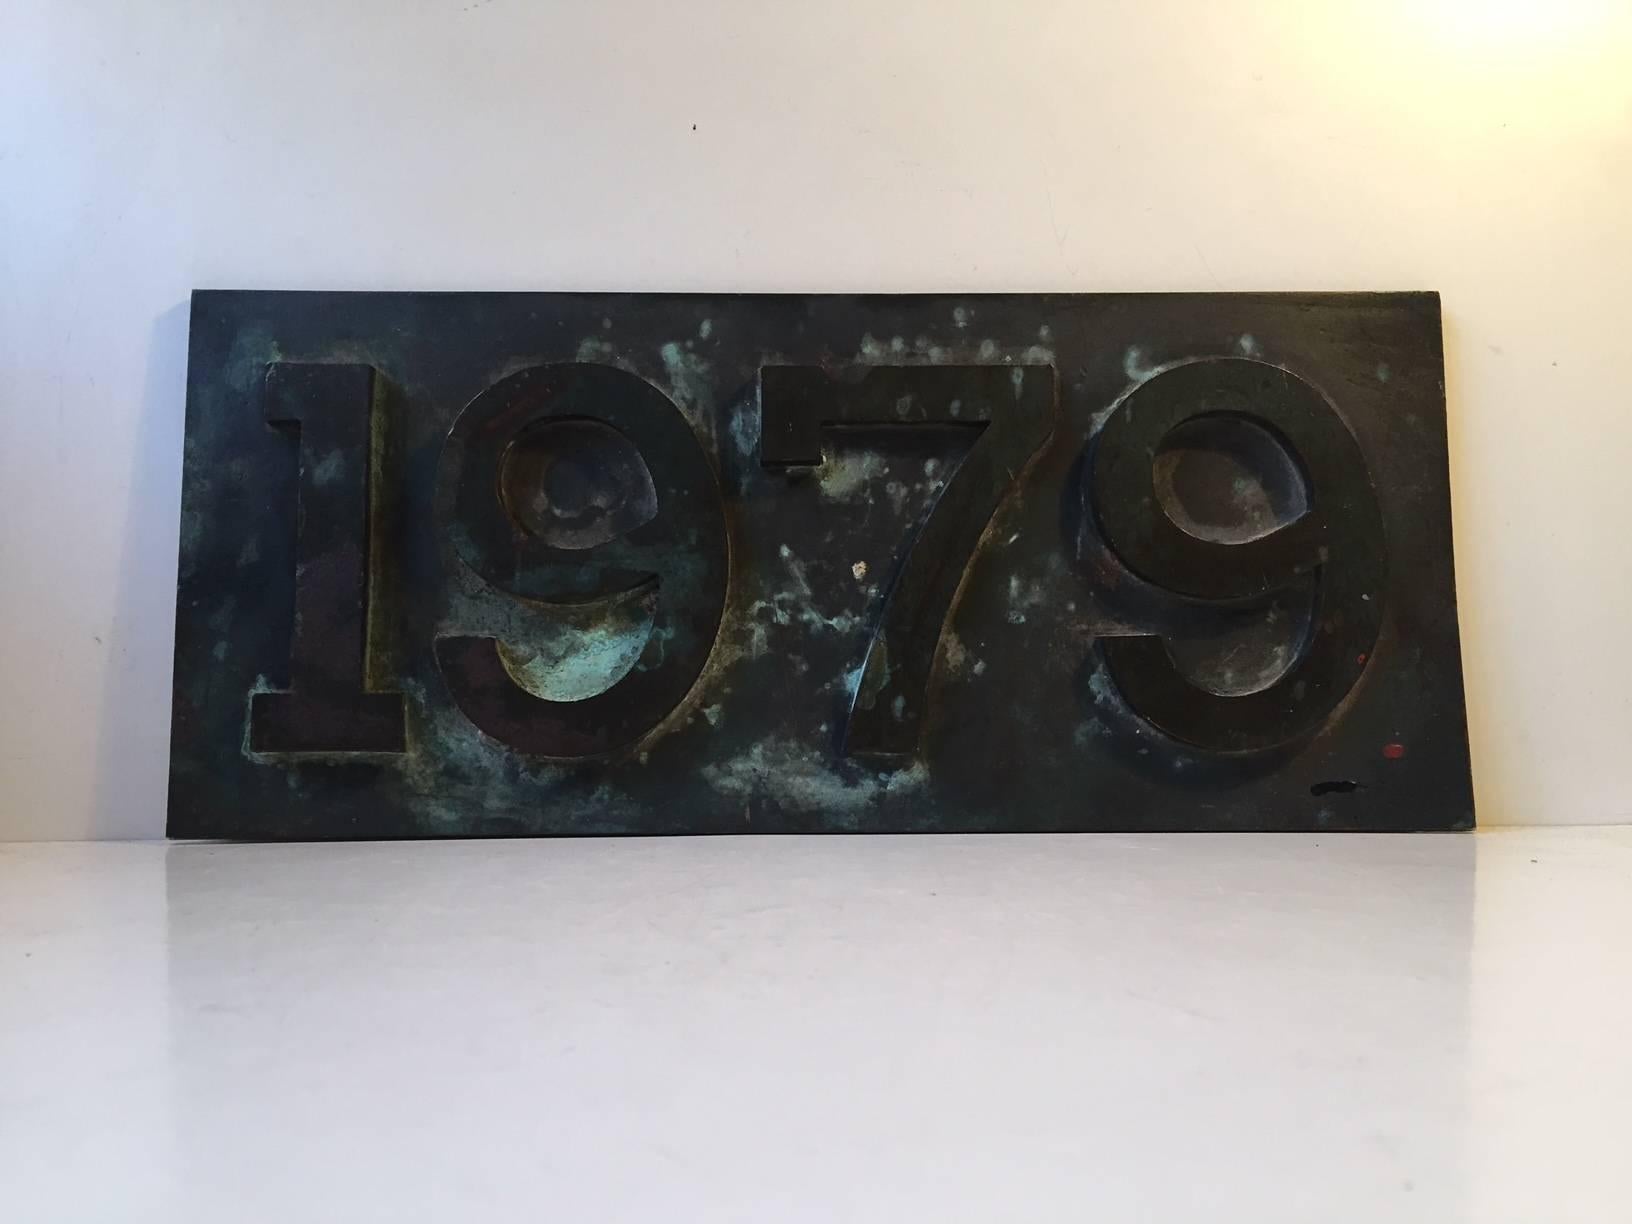 A very heavy and patinated bronze sign with raised numerals of the year 1979. The sign is handmade in thick stock and weighs in around 8 kg. The provenance remains uncertain but it might have been mounted on a train. It is slightly curved/bend to